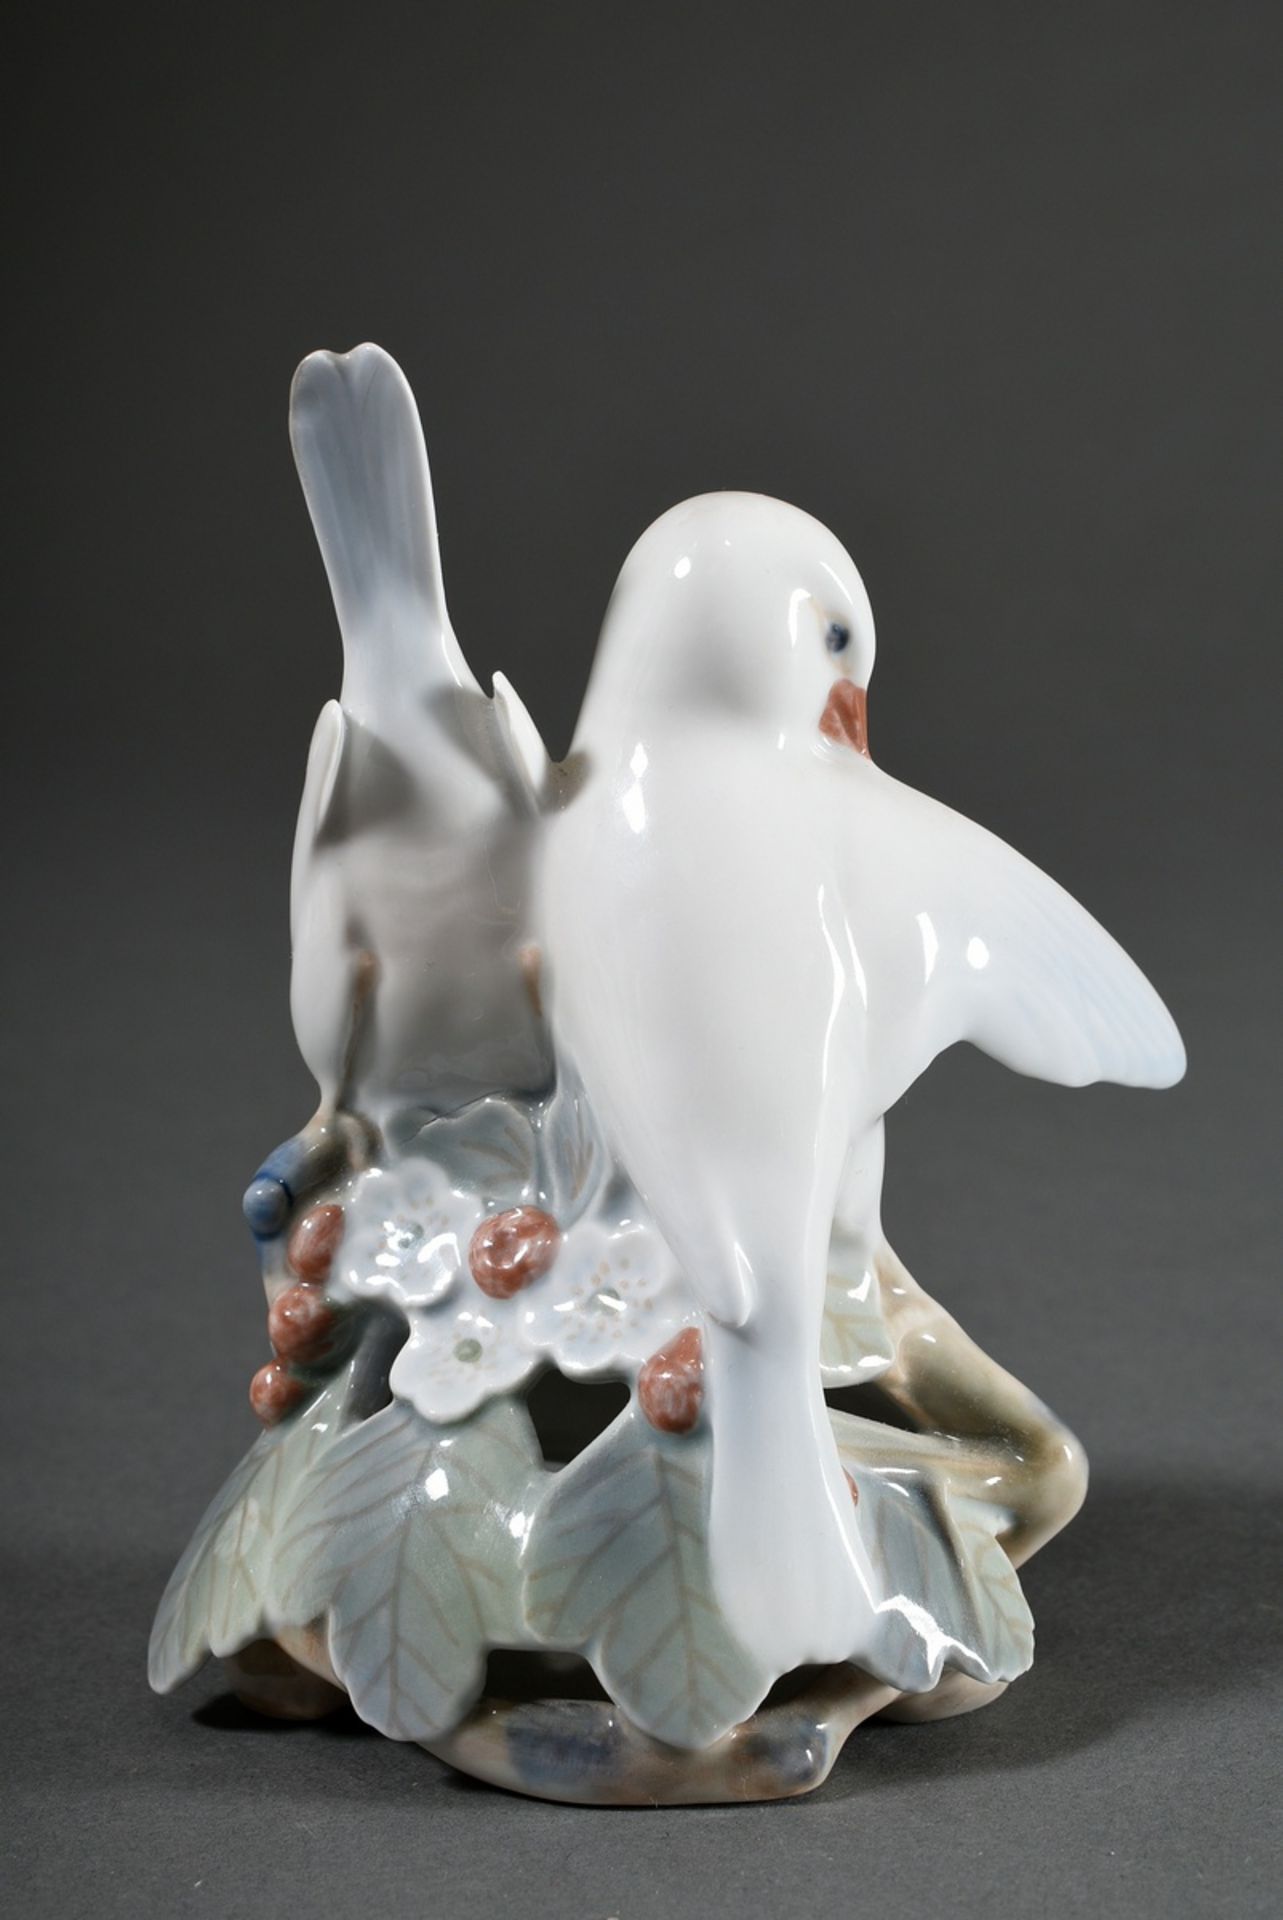 4 Various porcelain figures "Pair of Birds", "Pair of Monkeys", "Ram Rabbit" and "Standing Stag" wi - Image 6 of 13